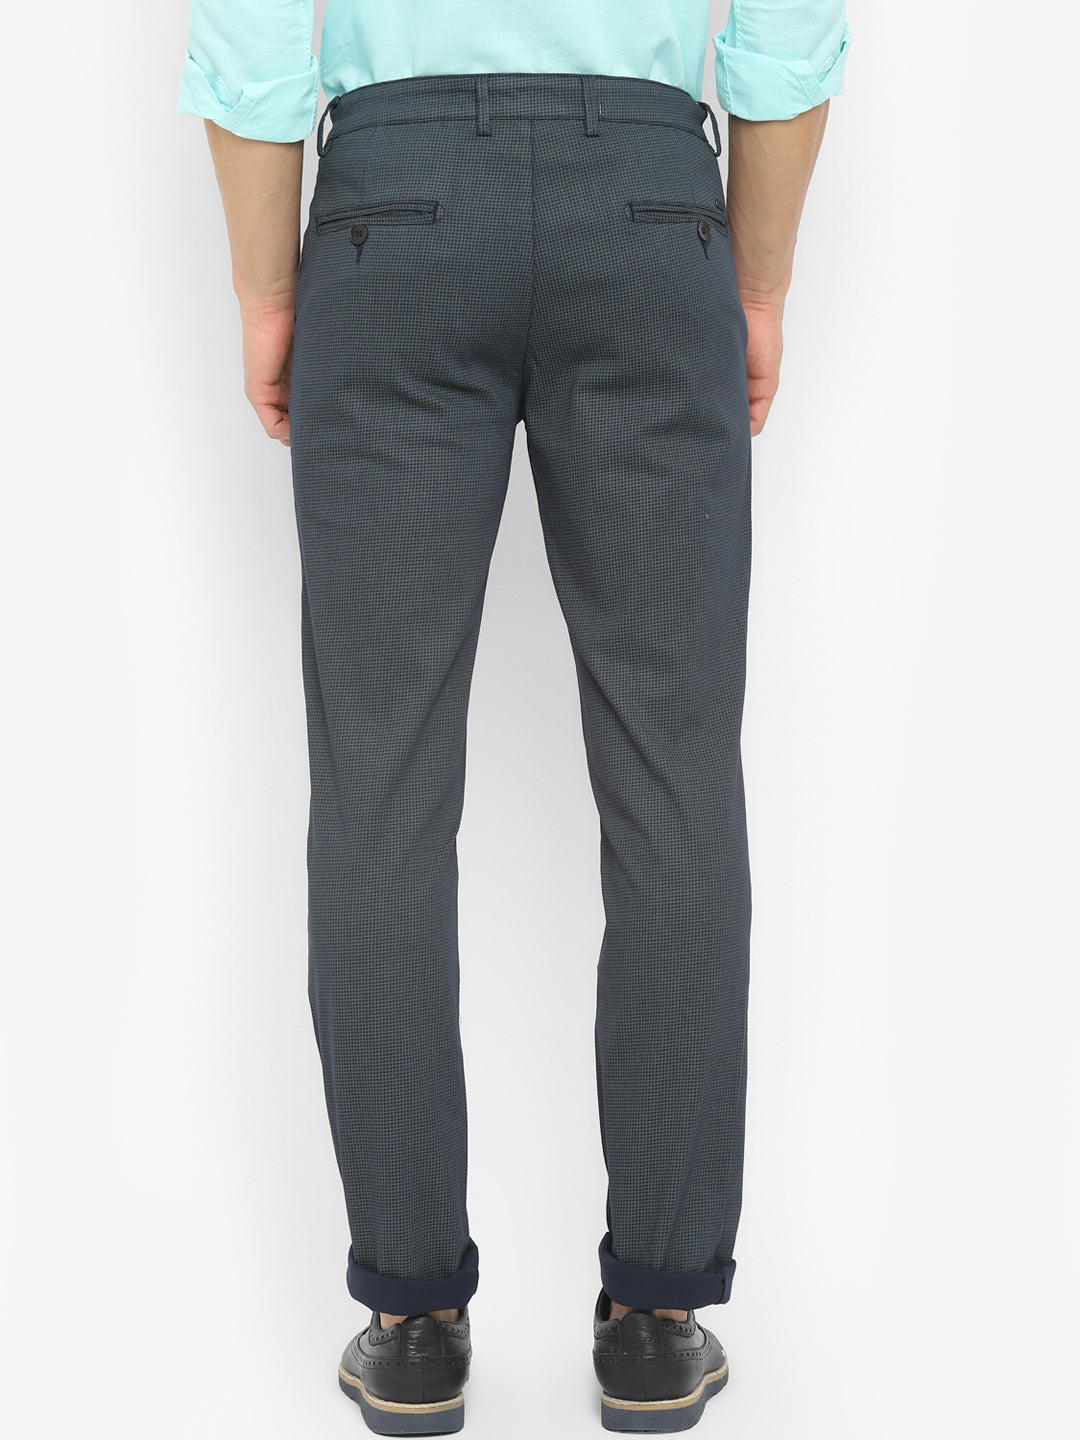 Cotton Stretch Dark Grey Checkered Ultra Slim Fit Flat Front Casual Trouser